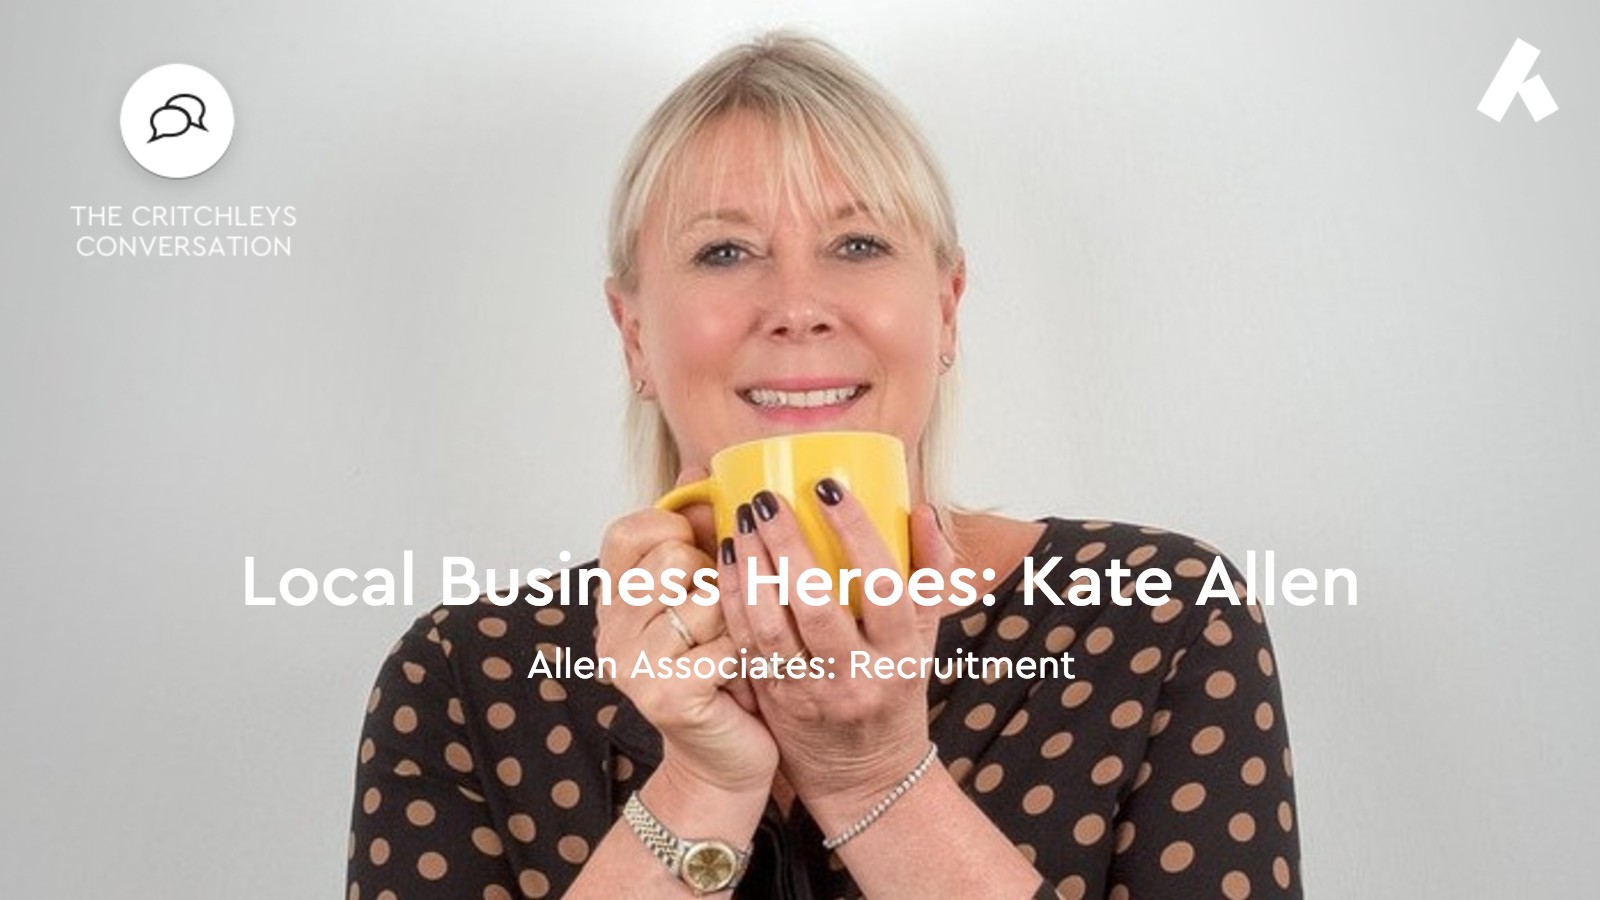 Local Business Heroes: Kate Allen